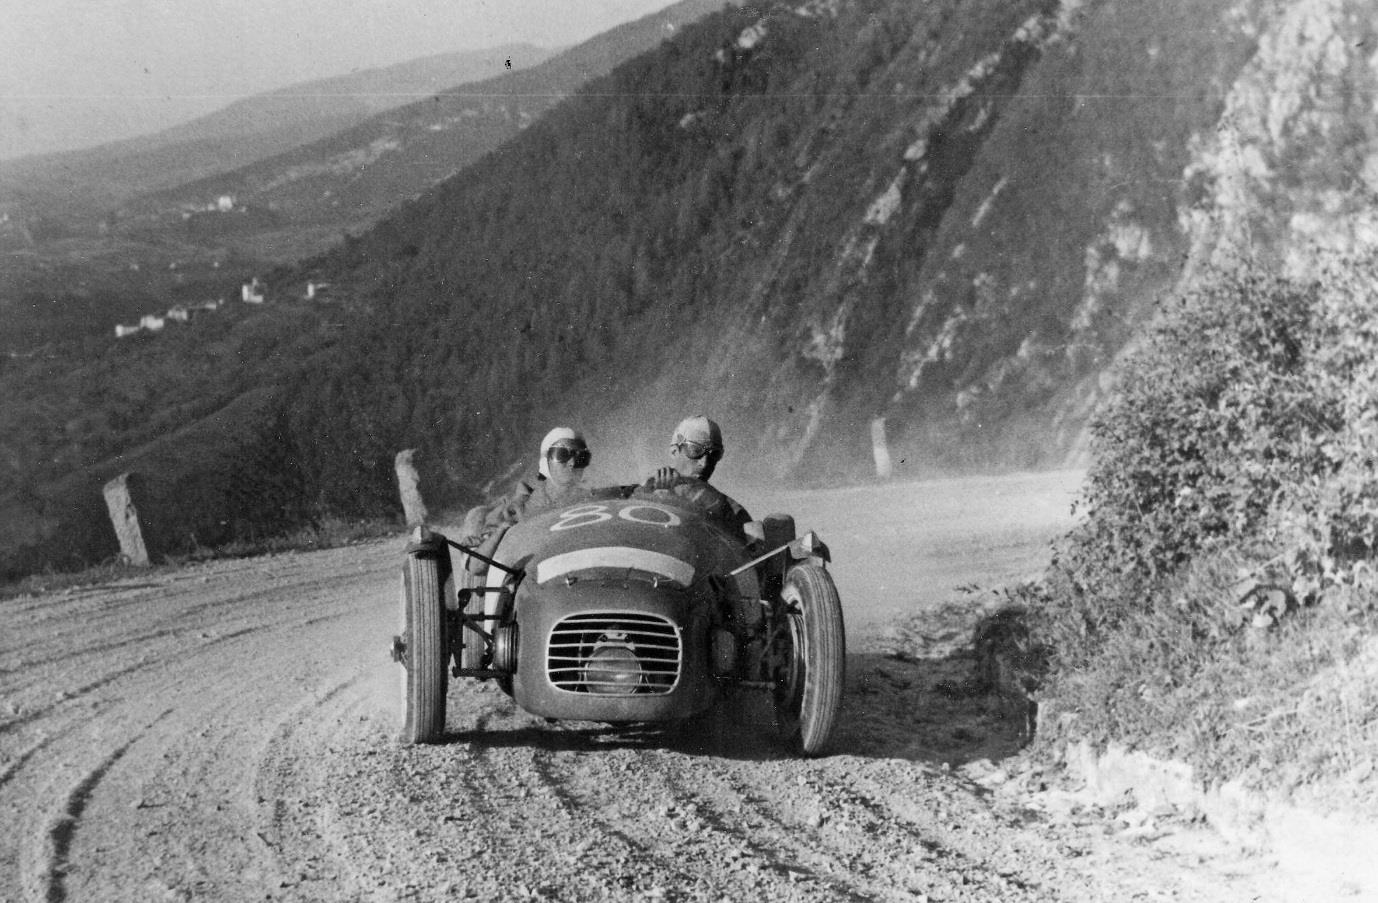 Driving the Urania-BMW  – powered by a BMW motor cycle engine – on the 1949 Stella Alpina event